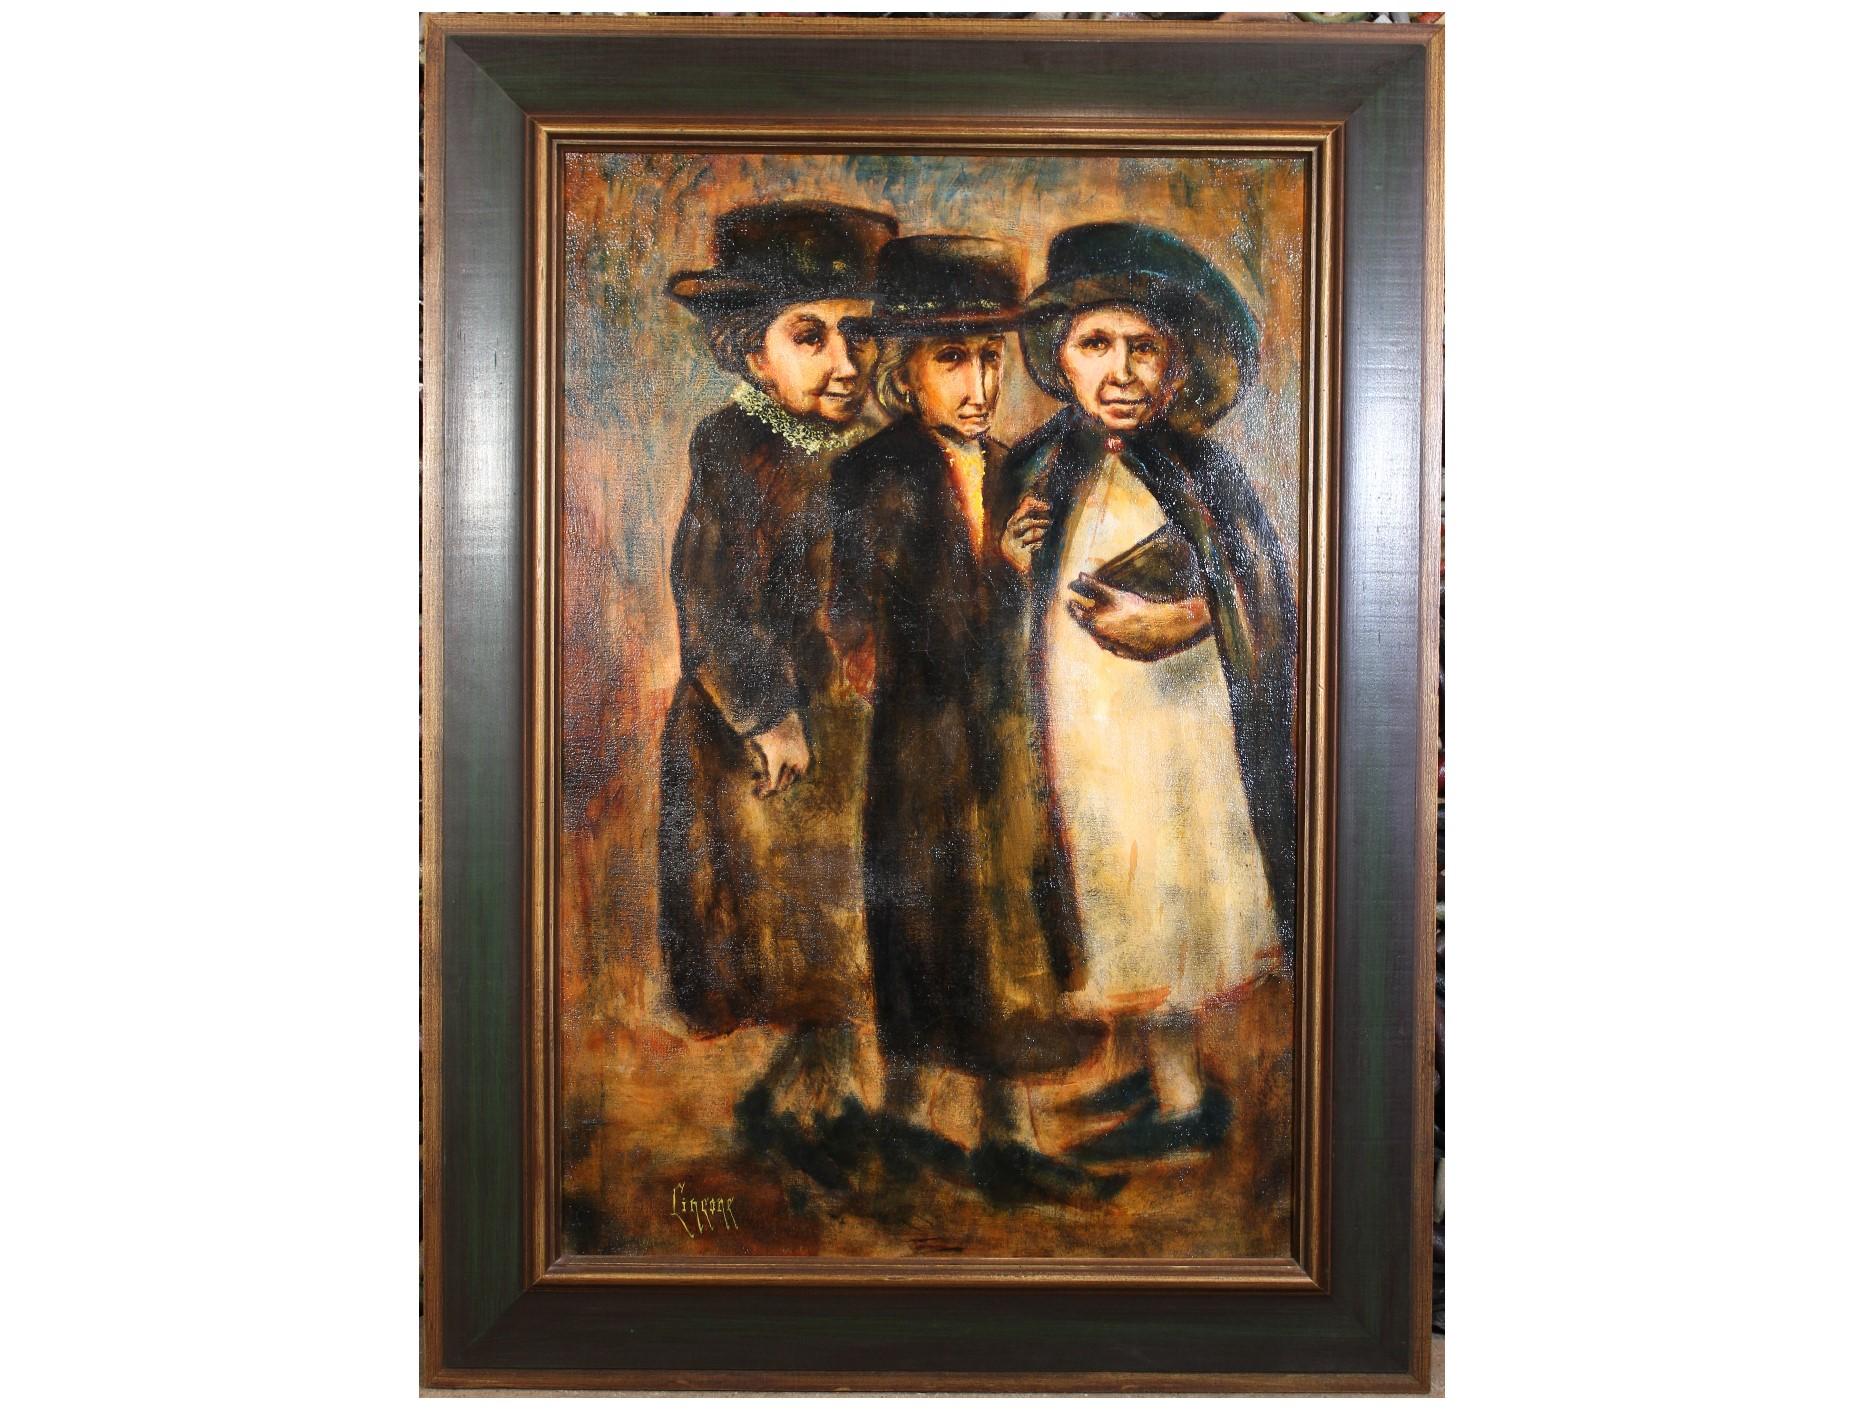 Don Cincone Figurative Painting - "Kindness, Strength, and Wisdom" Original Painting with Three Well Dressed Women